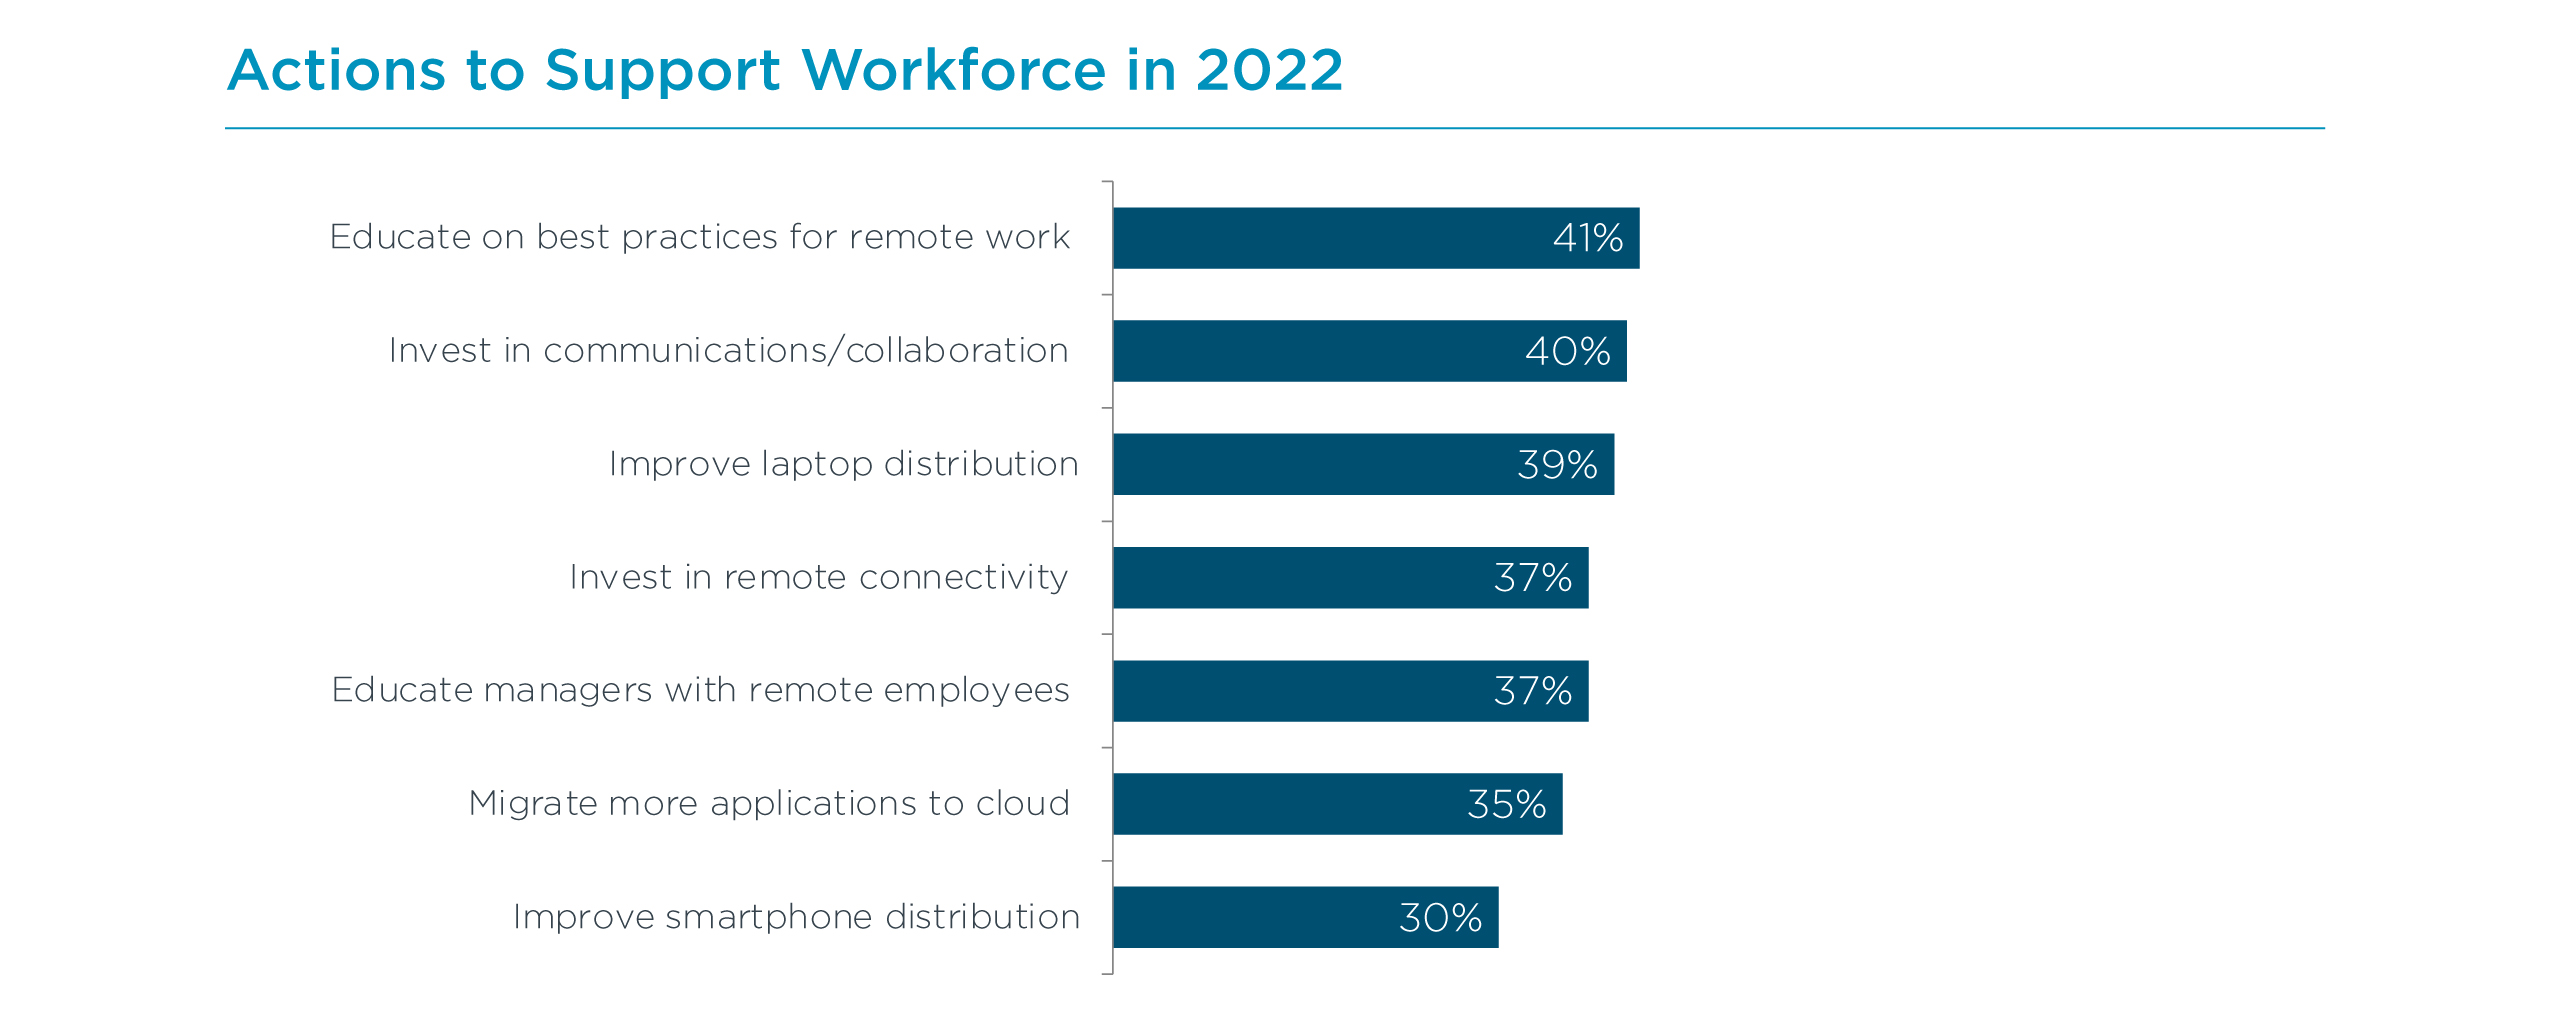 Actions to Support Workforce in 2022